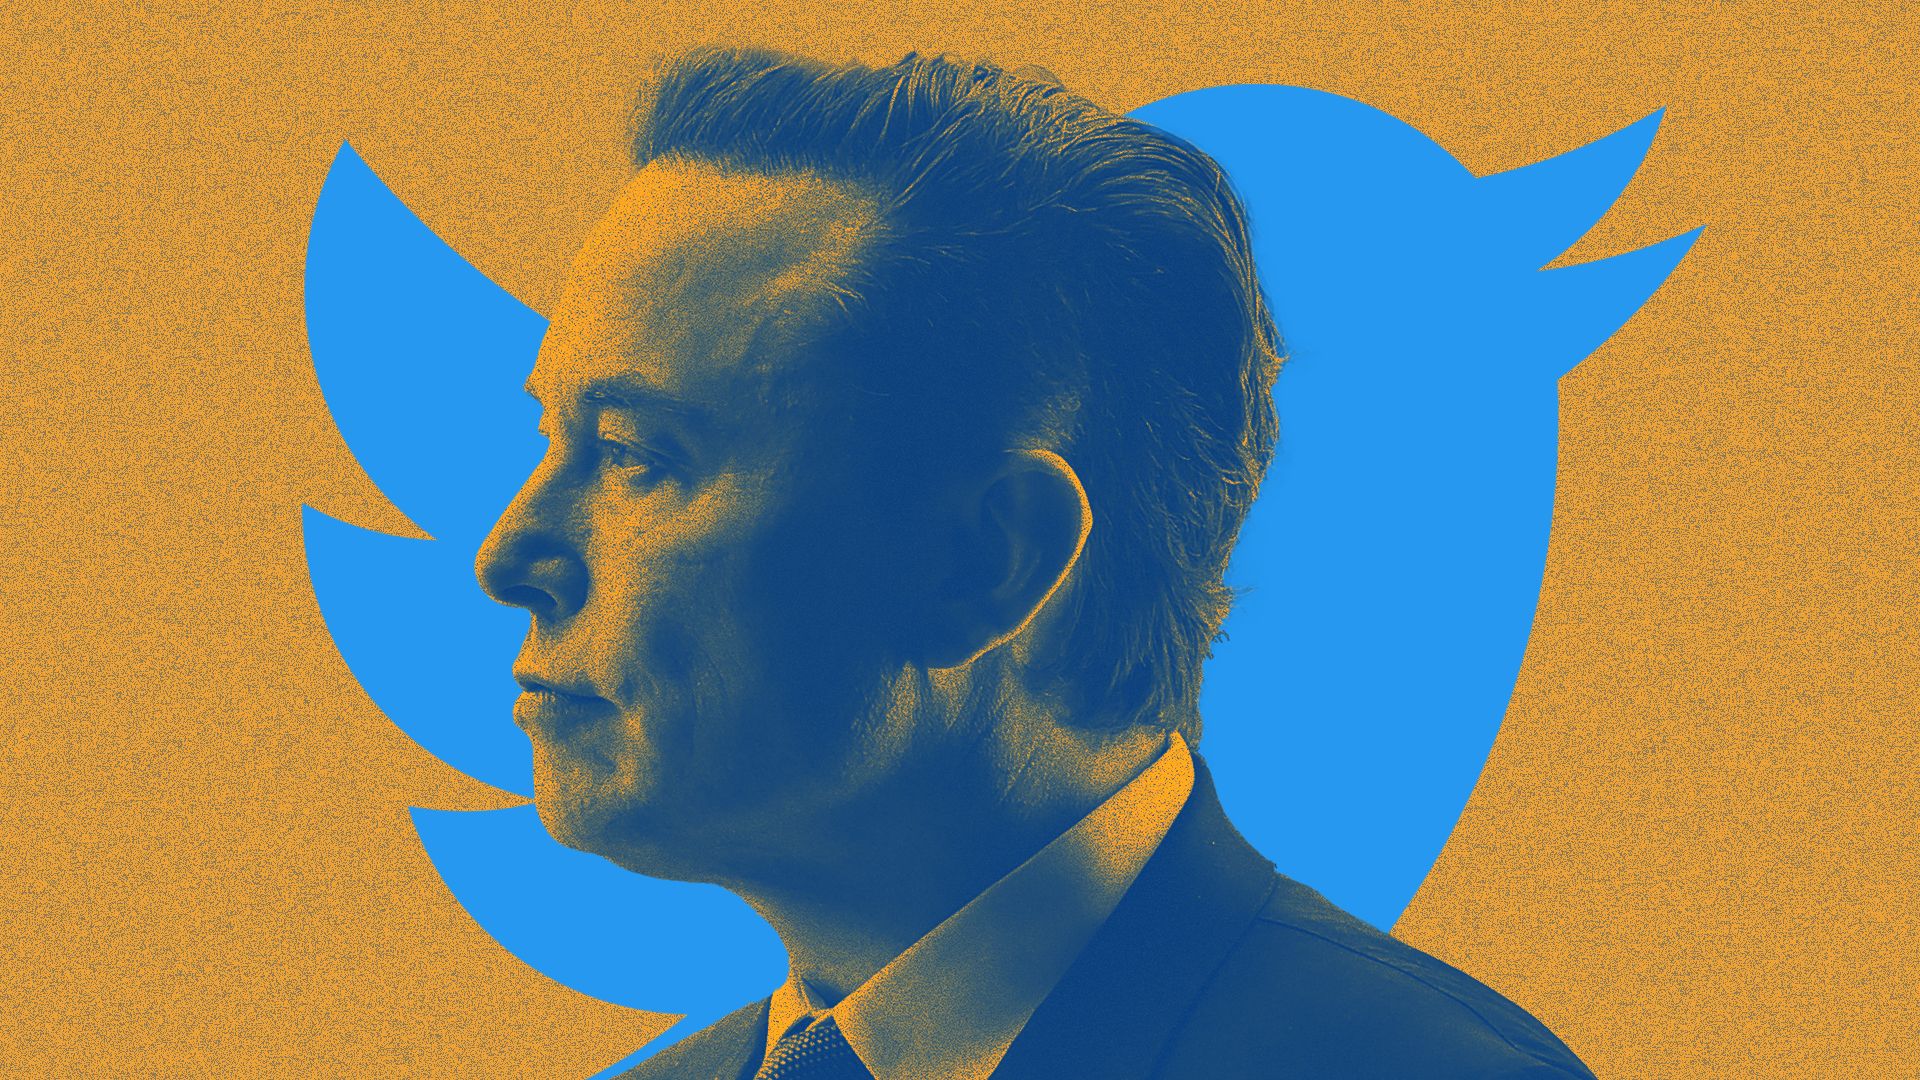 Elon Musk's face overlaps with the Twitter bird icon on an orange backdrop. 